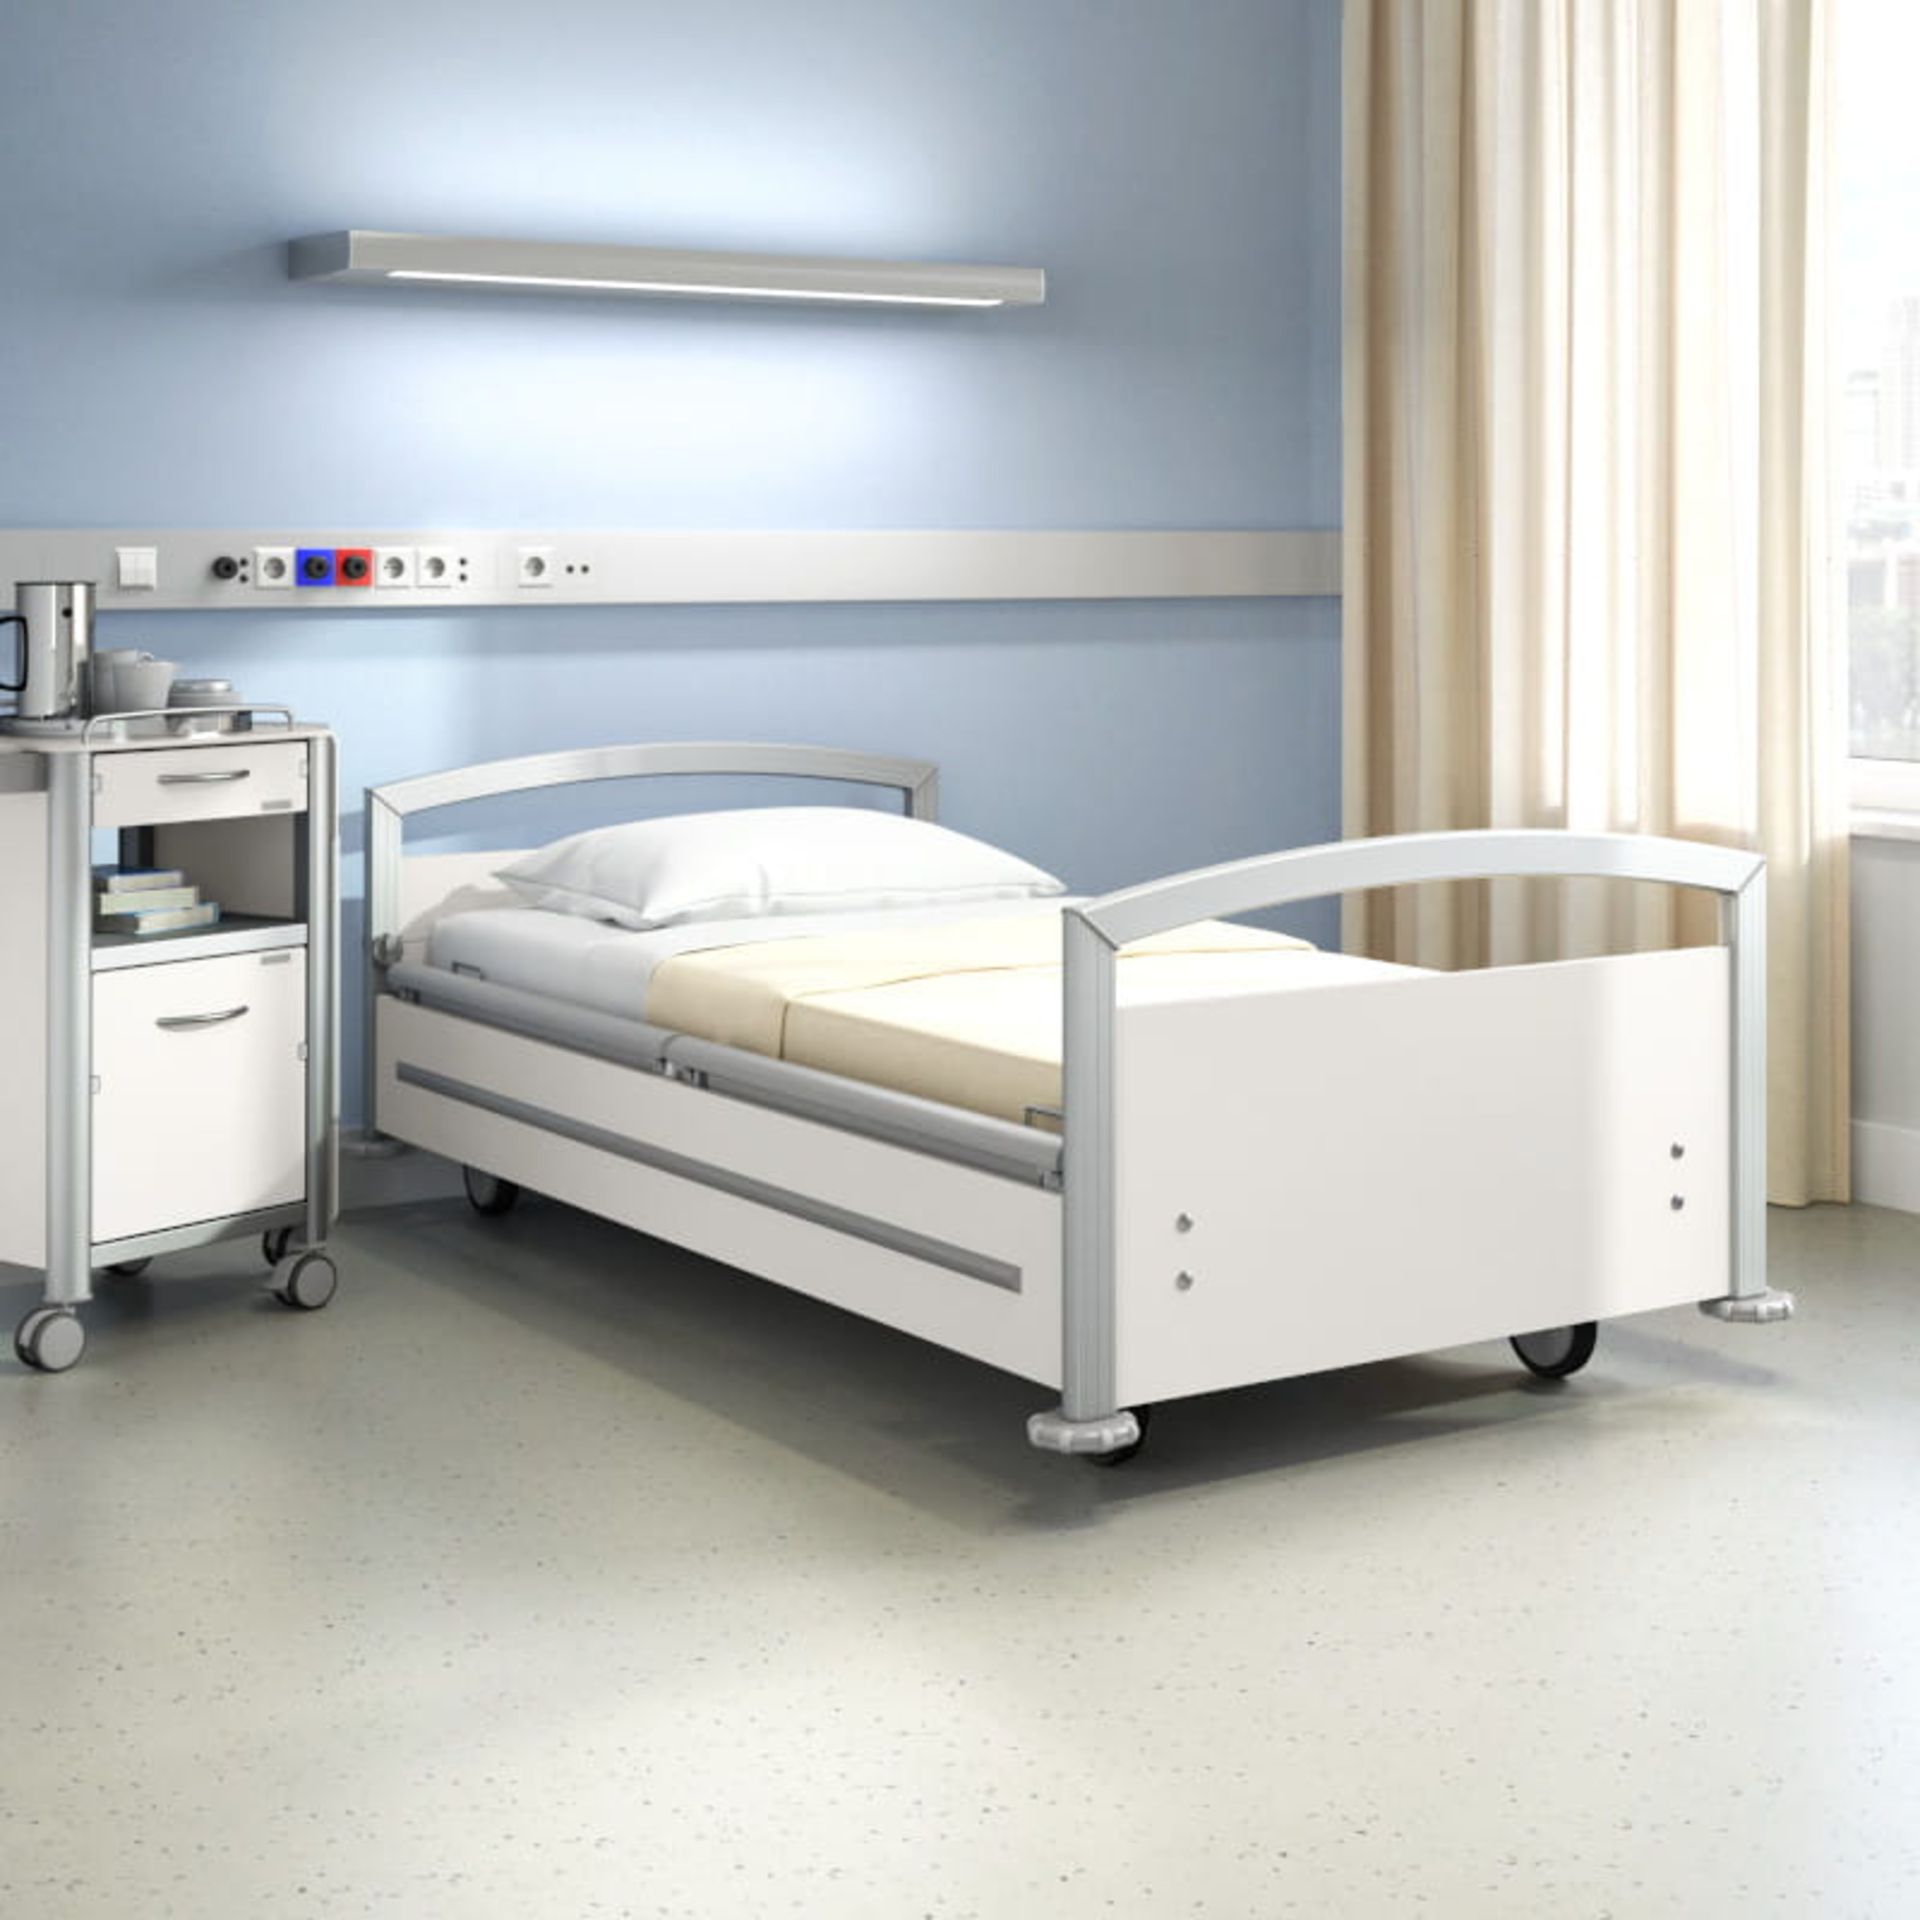 WISSNER BOSSAHOFF SENTIDA 6 ADJUSTABLE ELECTRIC BED WITH ARGYL II DYNAMIC AIRFLOW MATTRESSES